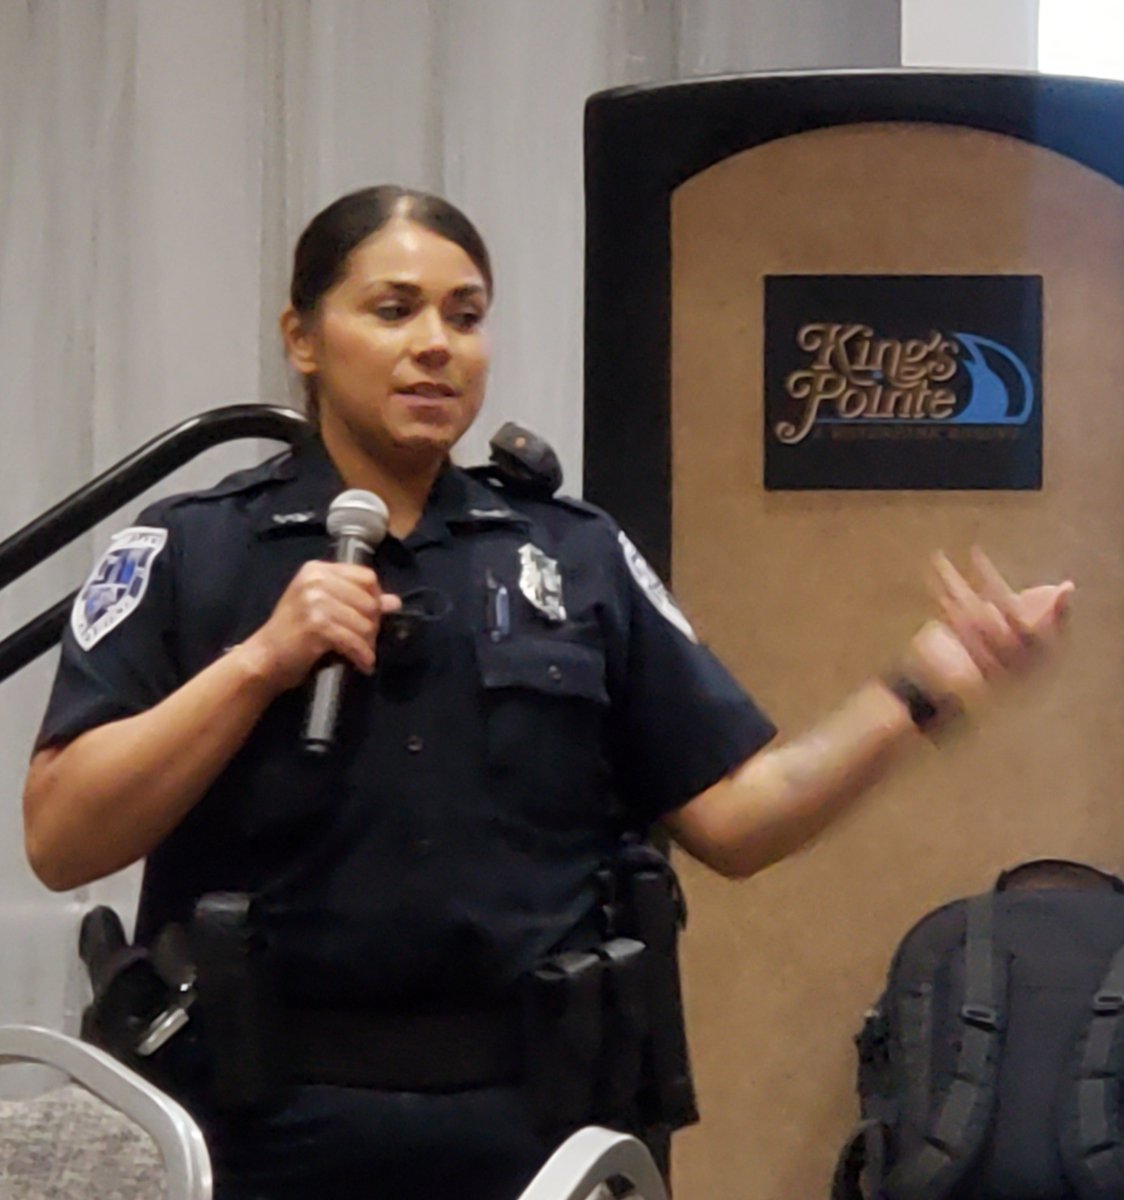 Thank you to Officers Salinas and Bravo for sharing their personal stories about diversity and inclusion, and how they use their positions as police officers to make positive connections within the community.

#StormLakePD
#BeABetterHuman
#StoriesThatMatter